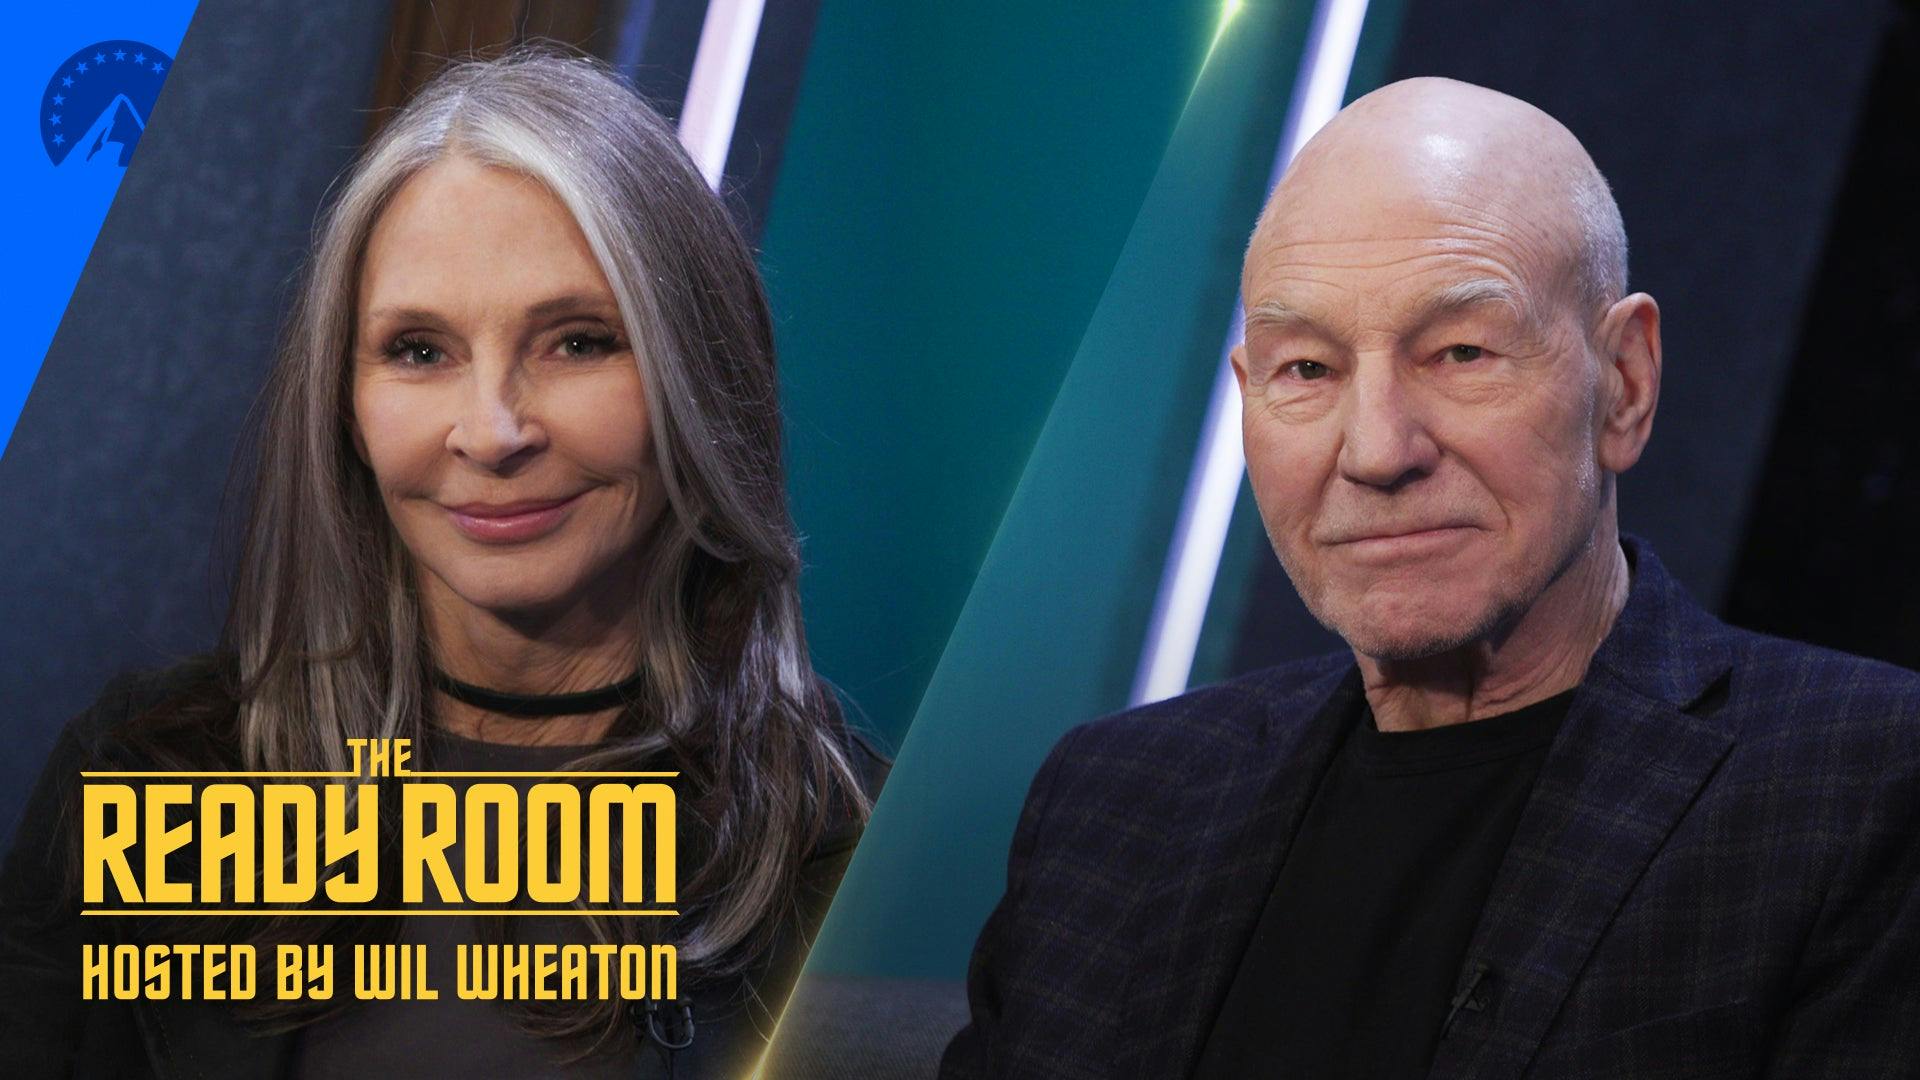 Gates McFadden and Patrick Stewart stop by The Ready Room